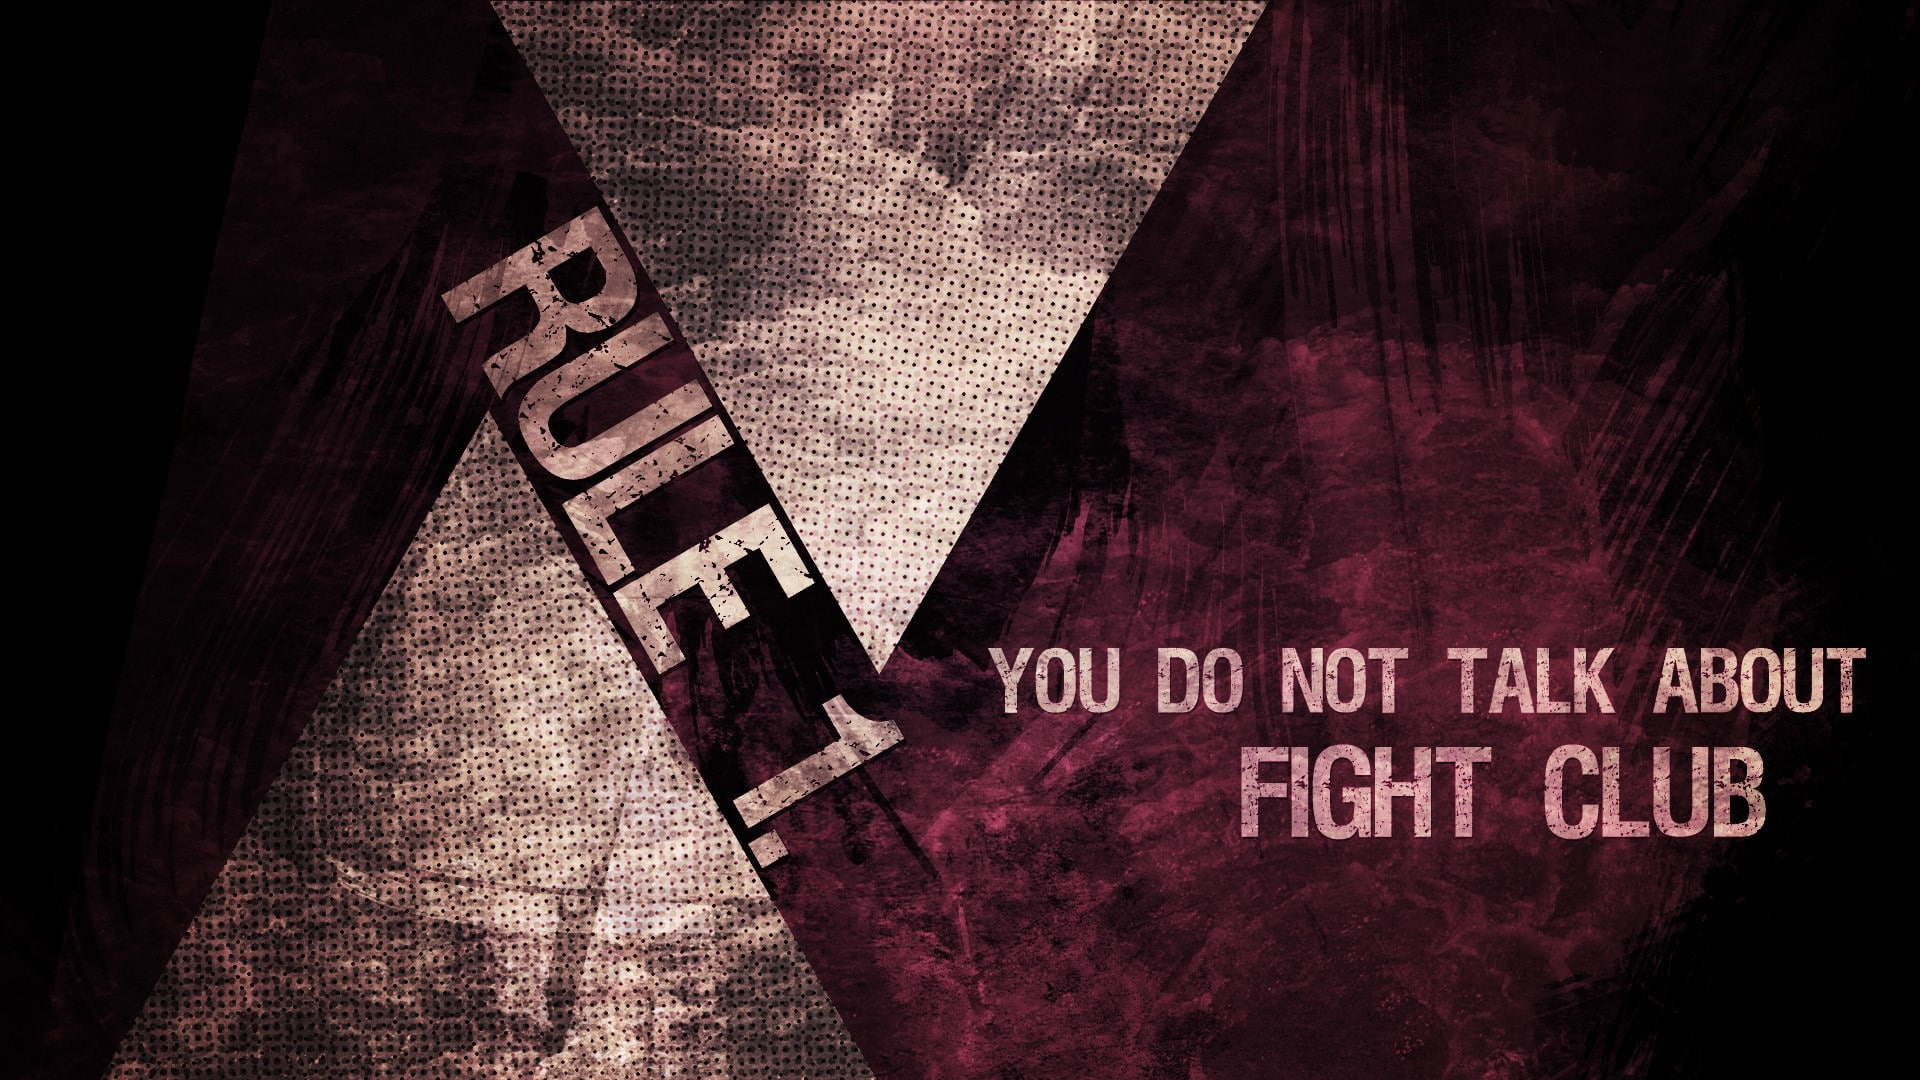 Fight club, Rule, You do not talk about fight club, communication